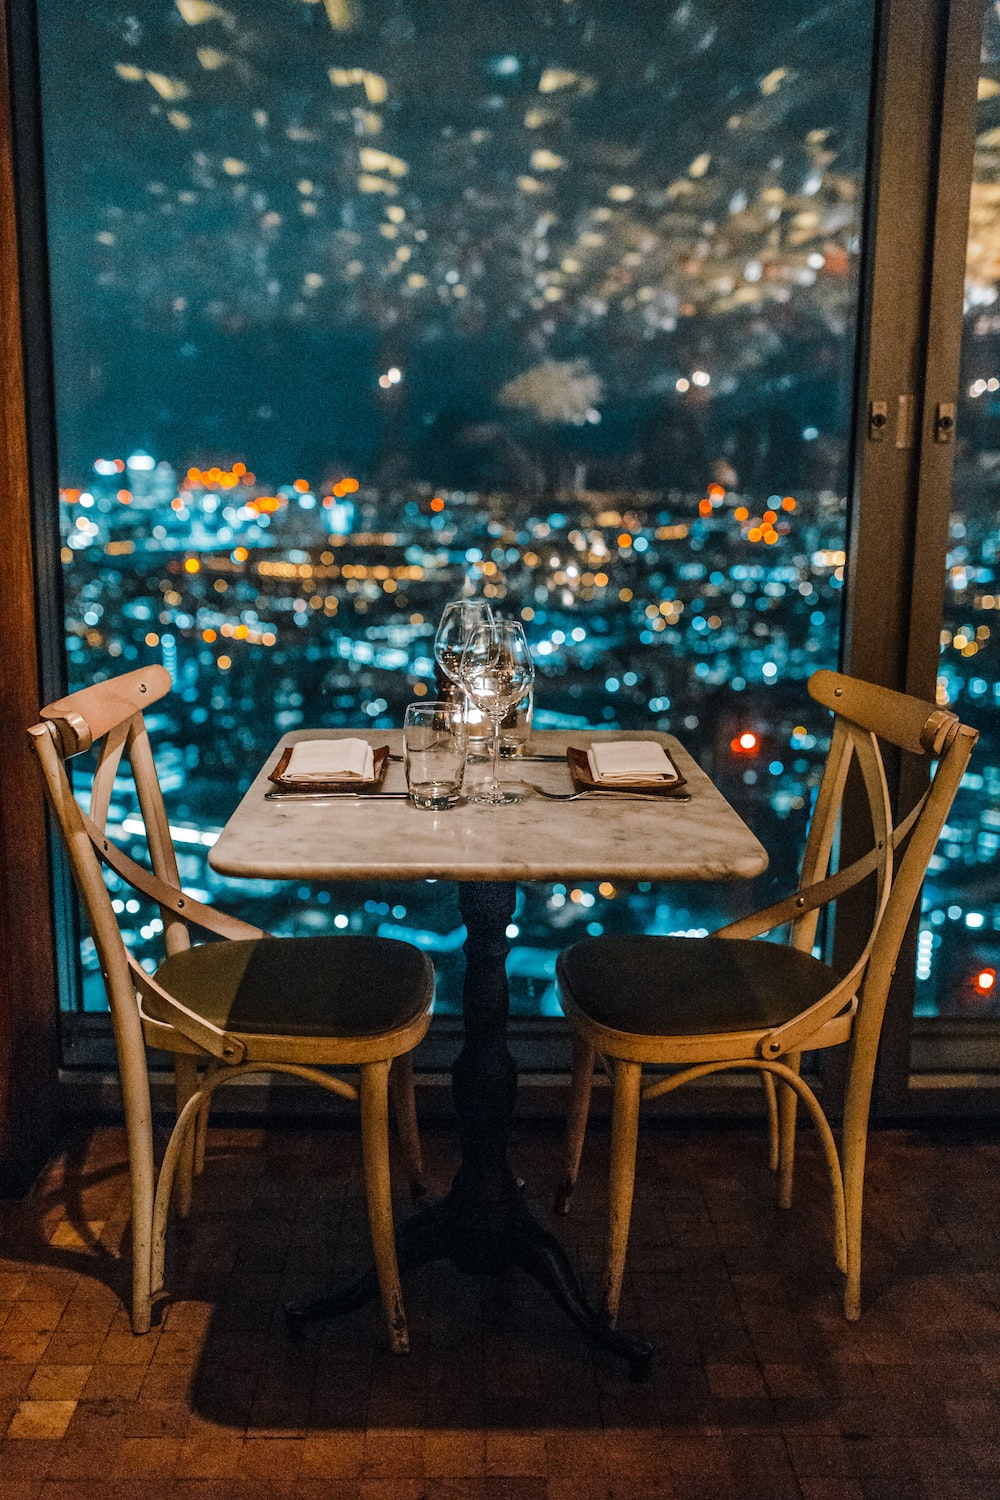 Date Night Wallpapers